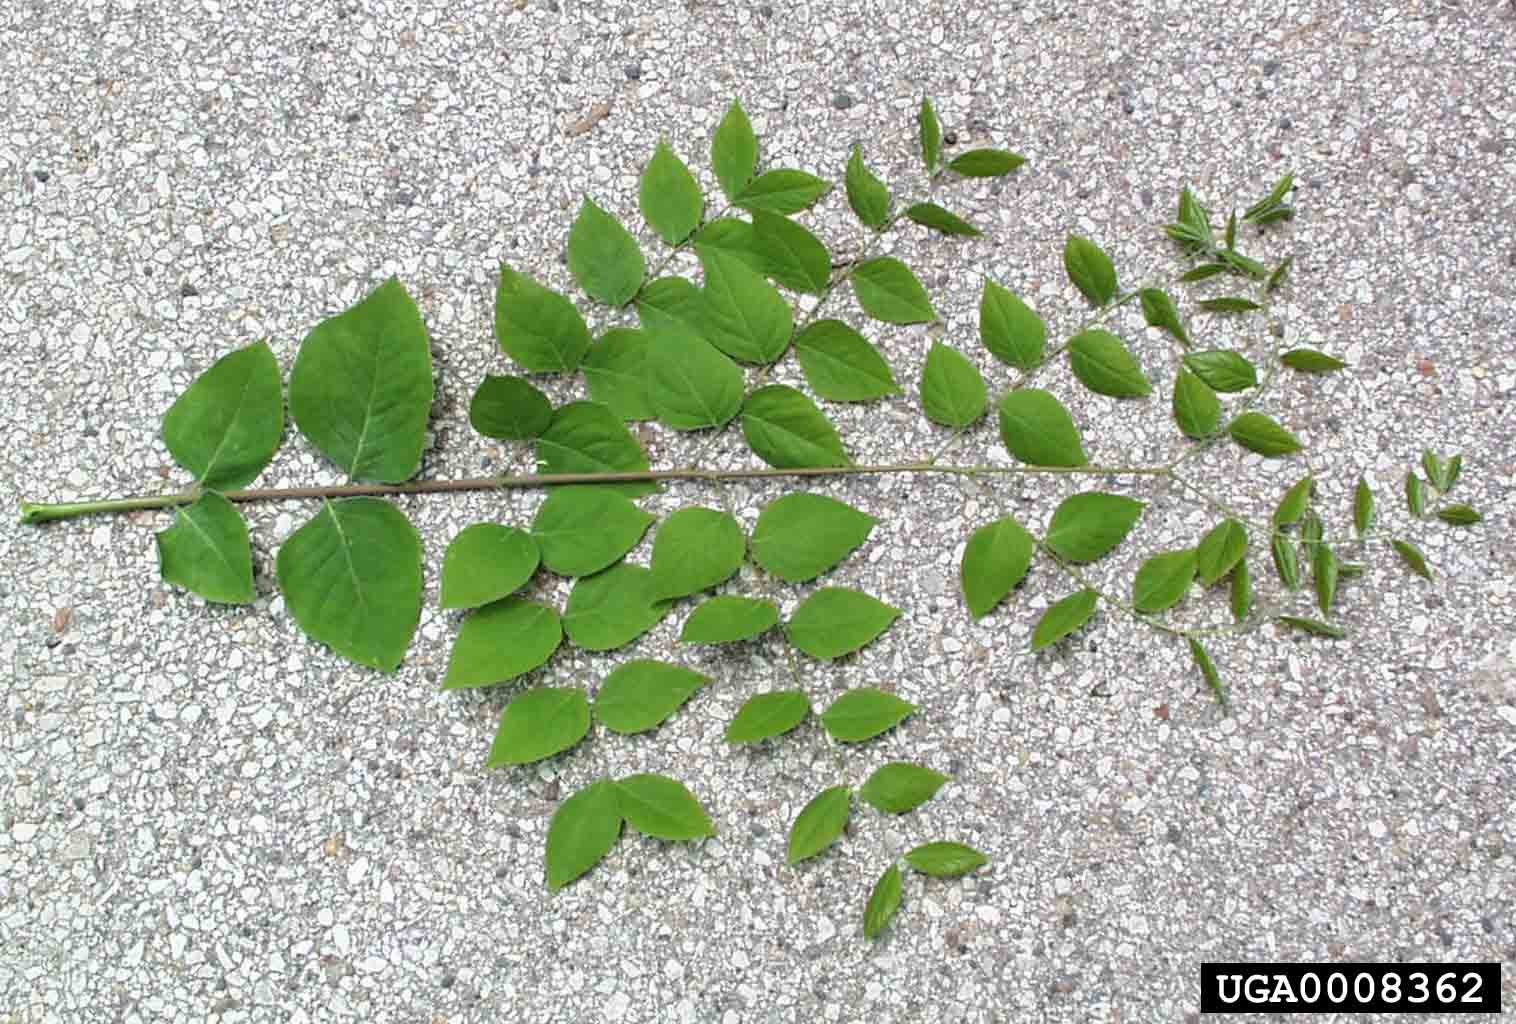 Kentucky Coffee-Tree leaf, bipinnately compound and up to 3' long